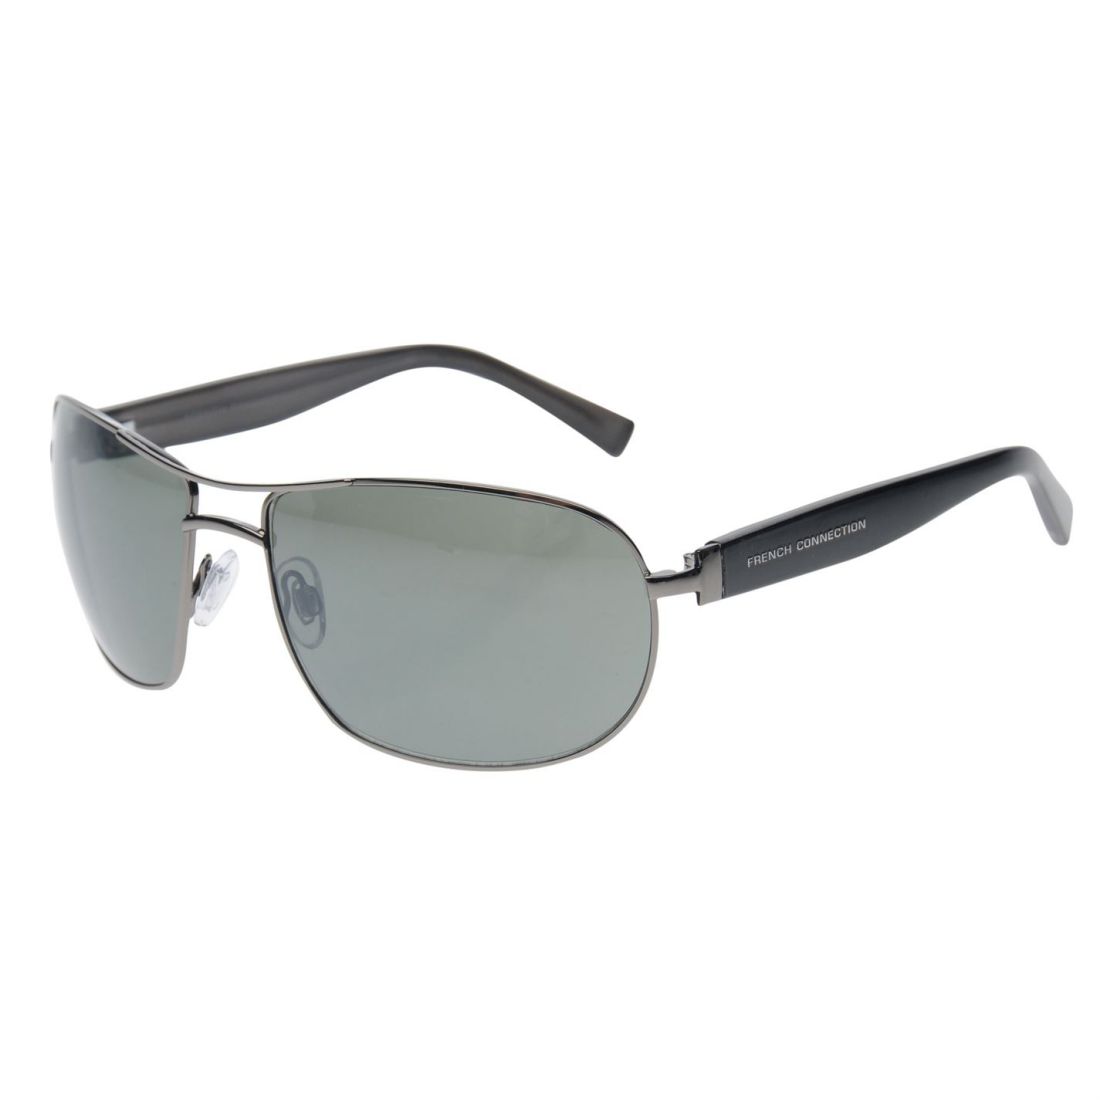 Mens French Connection Sunglasses New | eBay